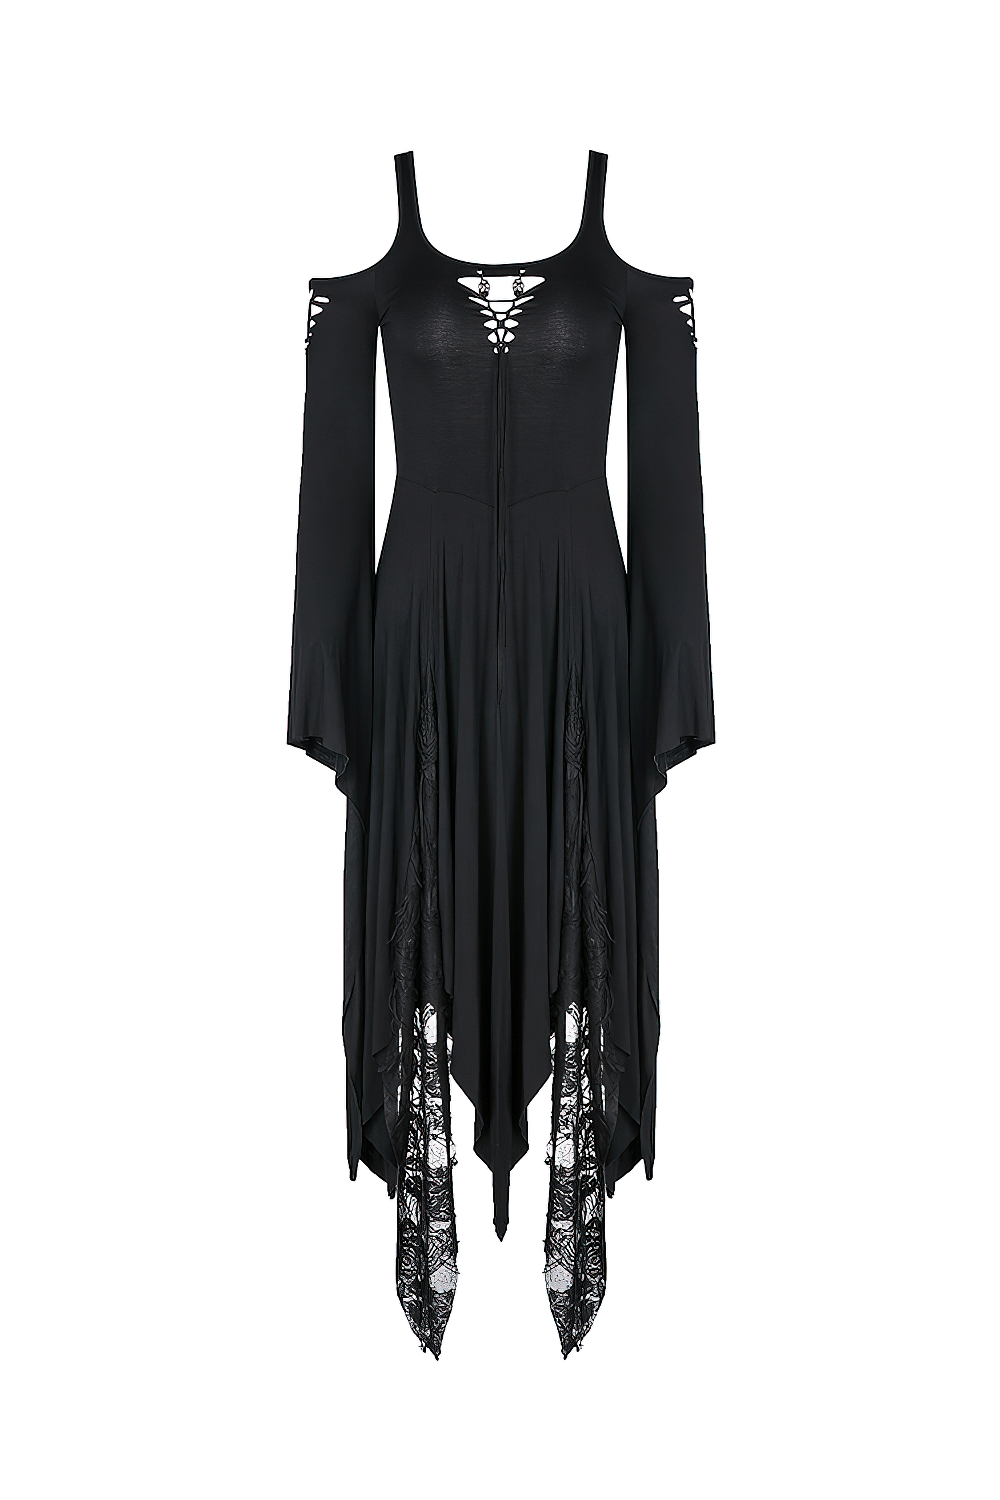 Dark Gothic Crochet Lace Sleeves Long Dress Witchy Style